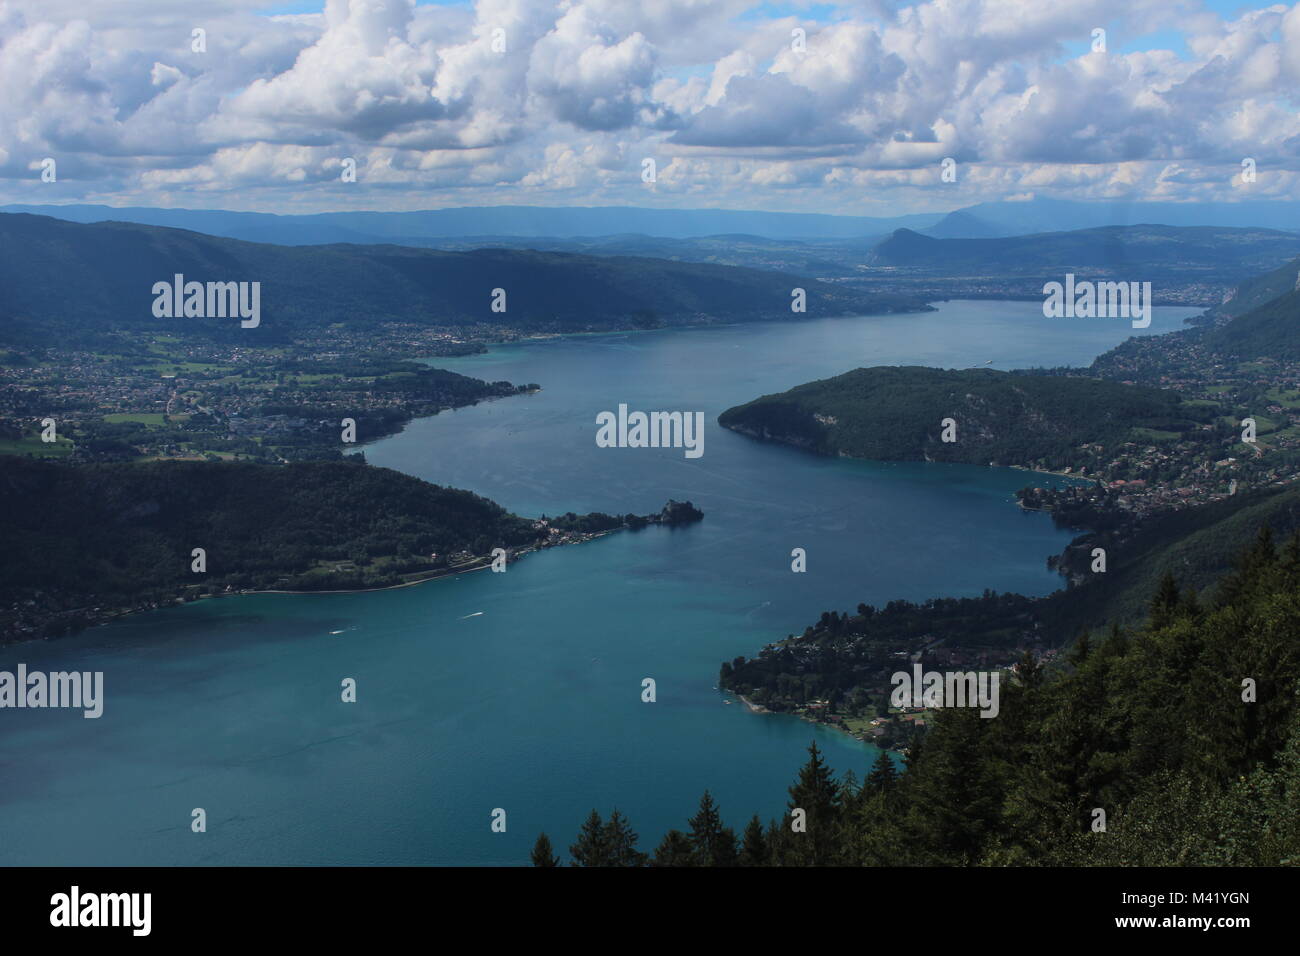 A View of Lake Annecy in the French Alps Stock Photo